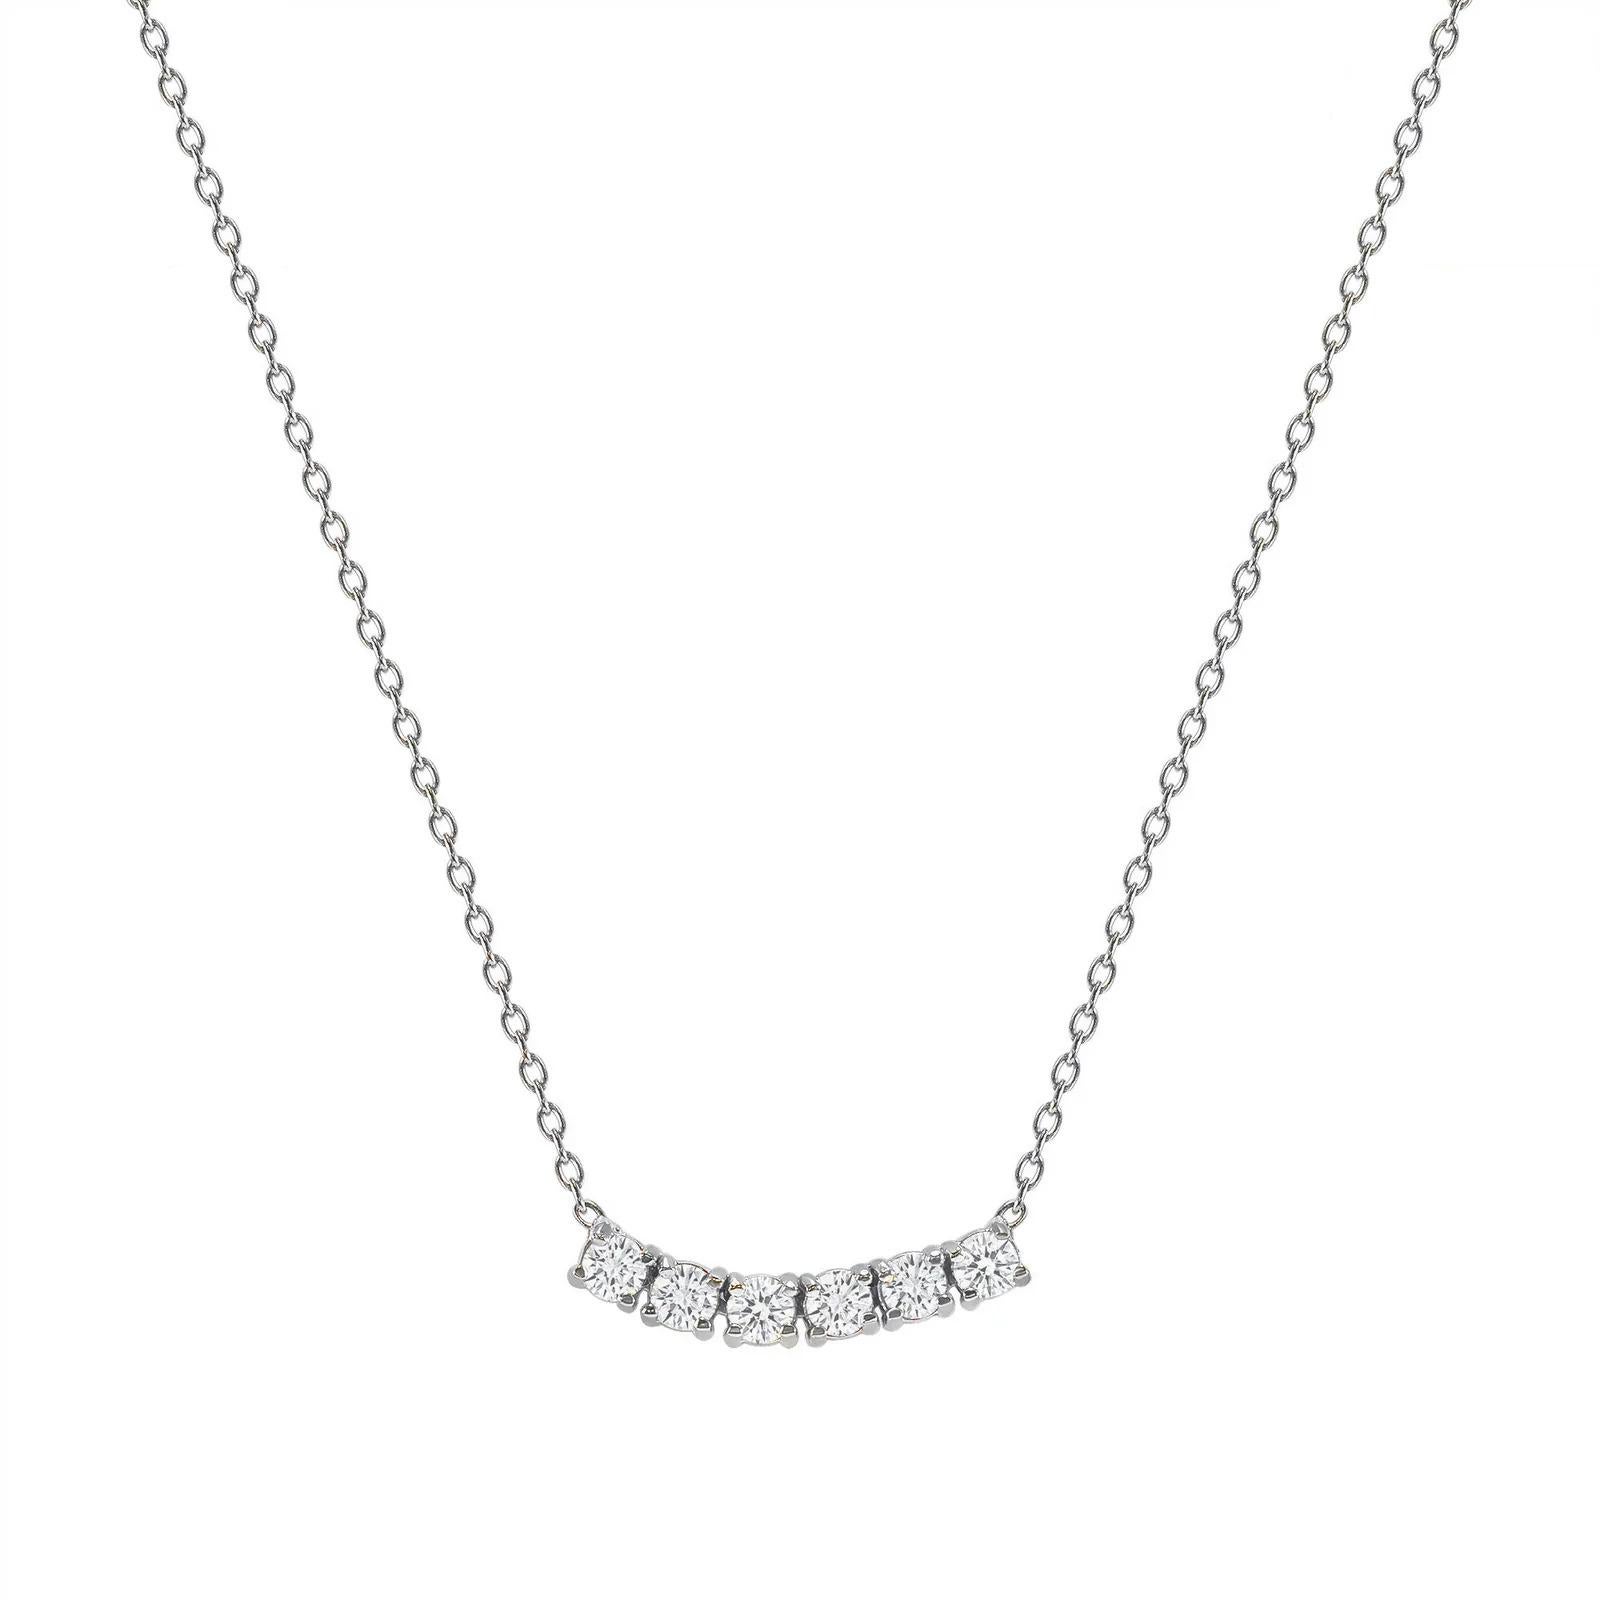 This petite, curved diamond necklace is crafted with gorgeous 14k gold set with six round diamonds.  

Gold: 14k 
Diamond Total Carats: 0.25ct
Diamond Cut: Round (6 diamonds)
Diamond Clarity: VS
Diamond Color: F
Color: White Gold
Necklace Length: 20